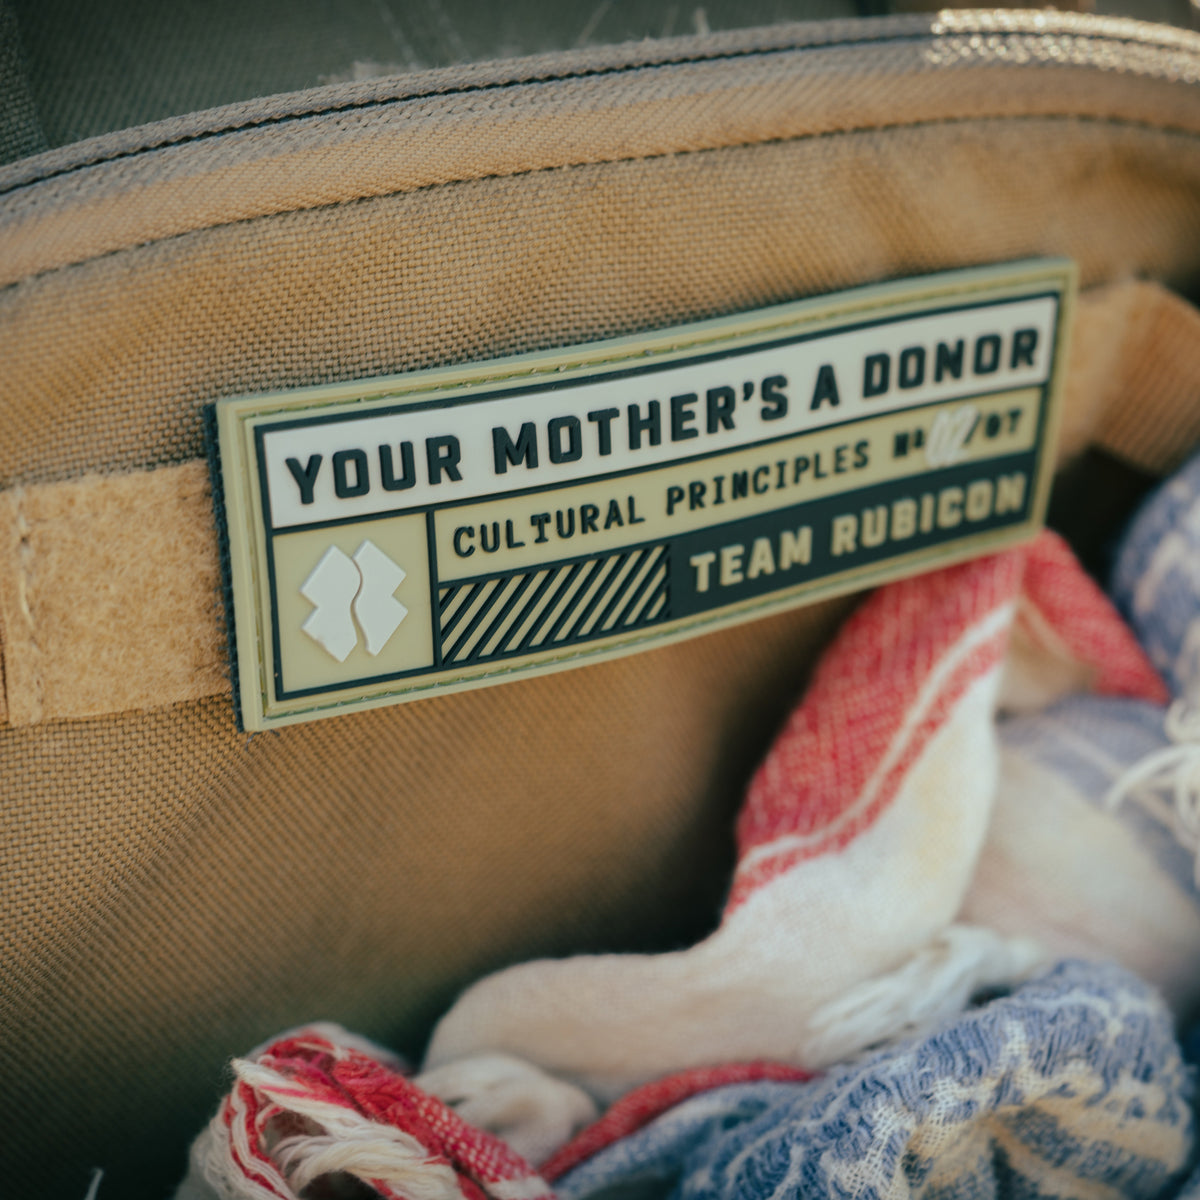 Your Mother's a Donor Patch